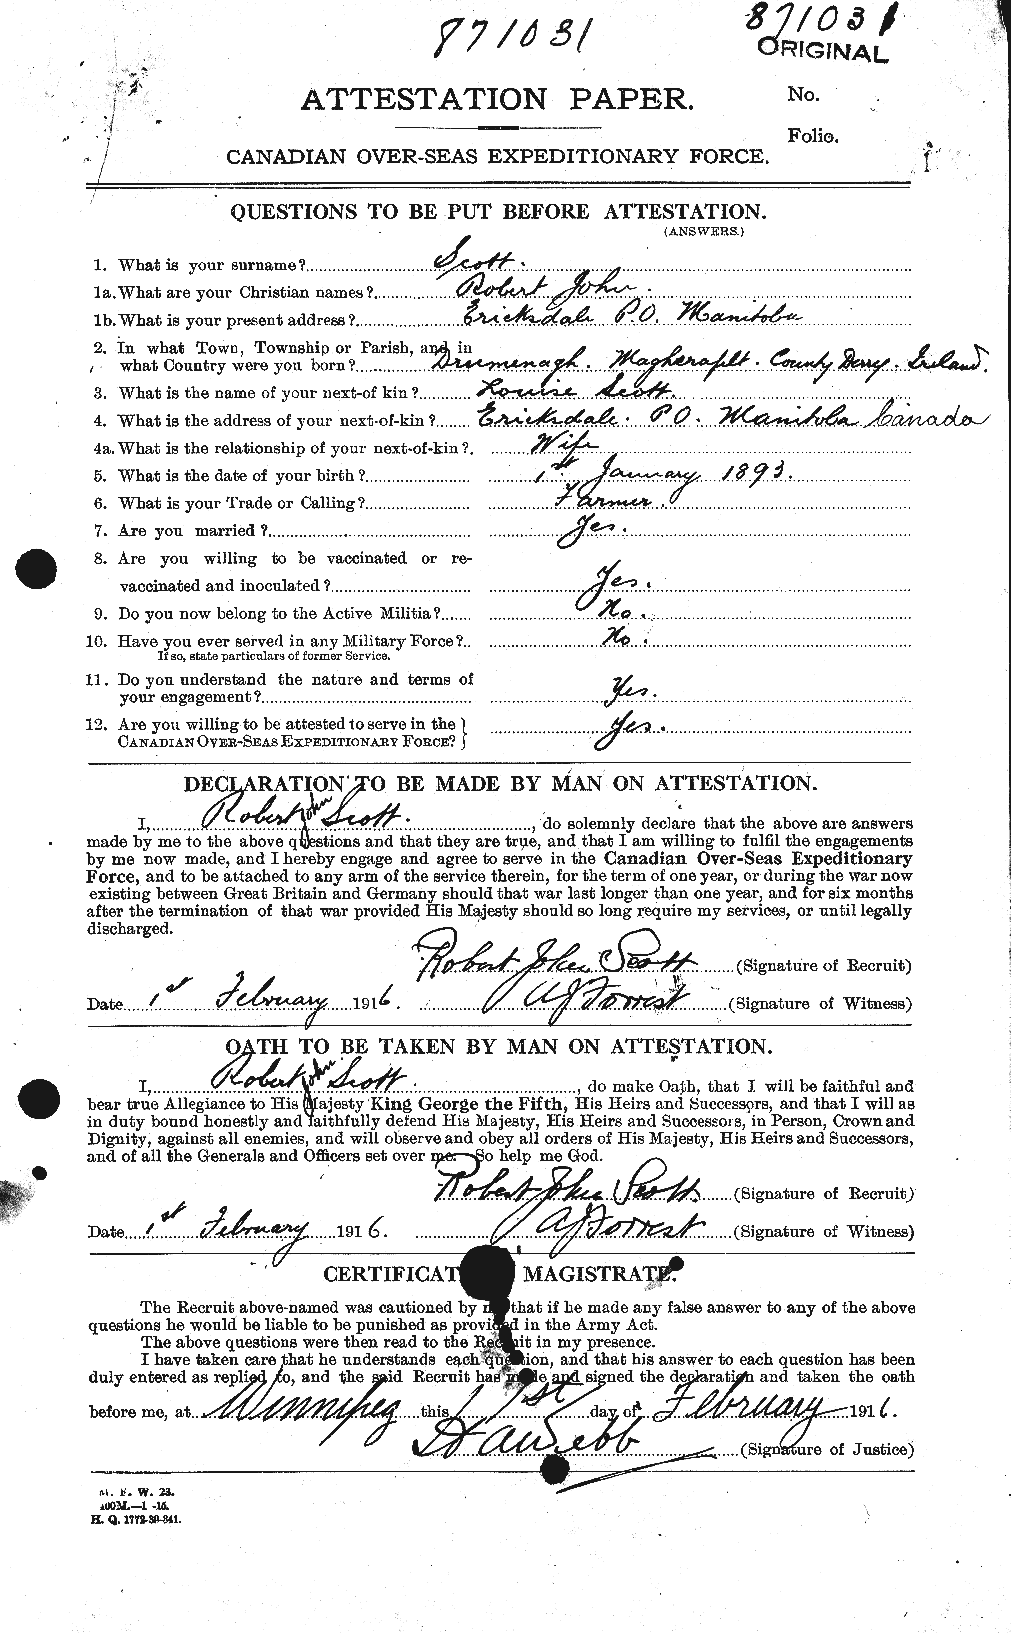 Personnel Records of the First World War - CEF 089129a